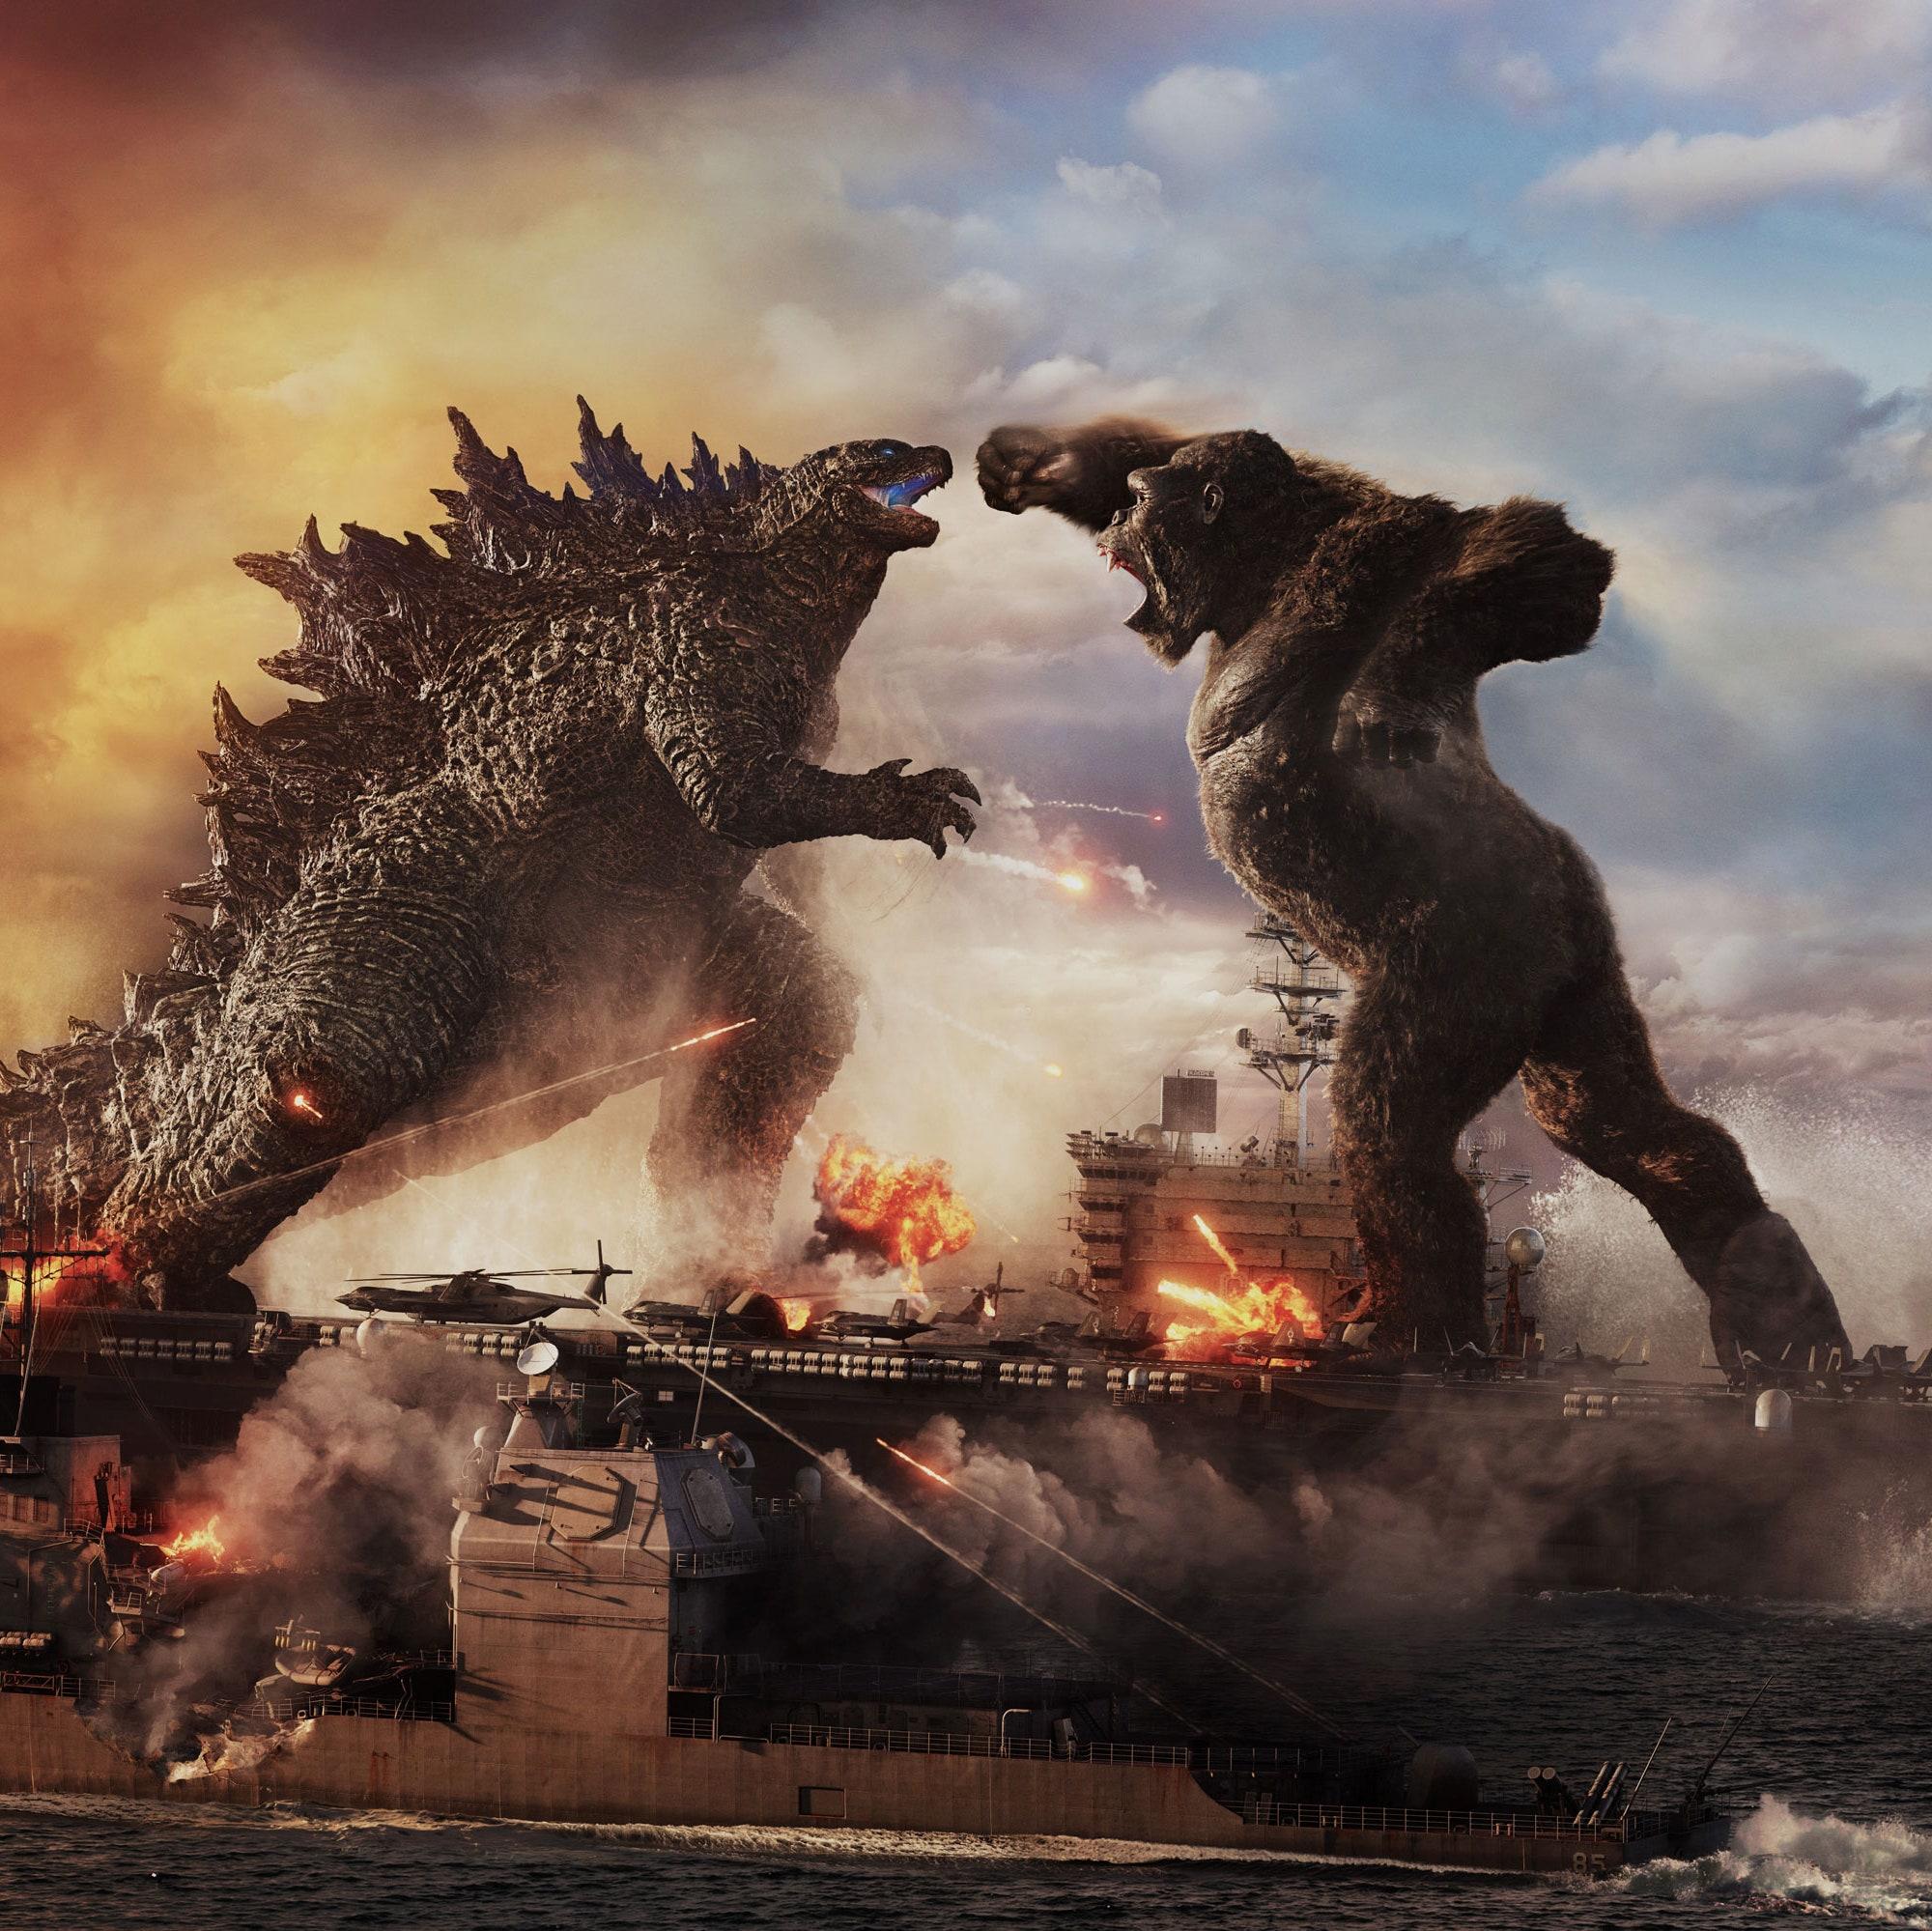 Godzilla vs Kong and the impossible physics of giant monsters